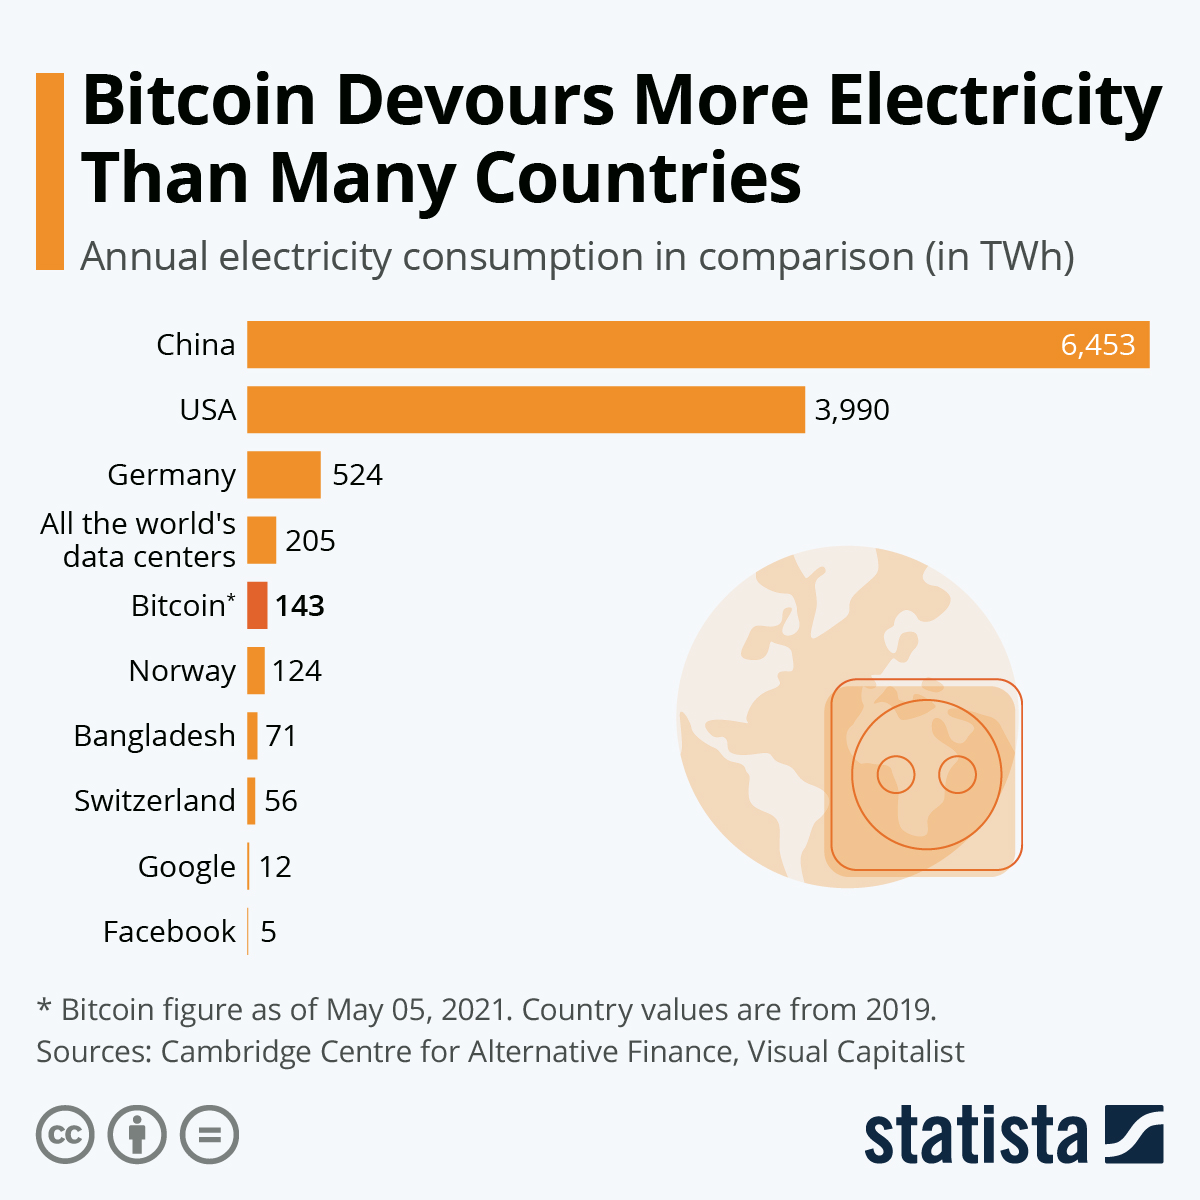 why does bitcoin require so much energy